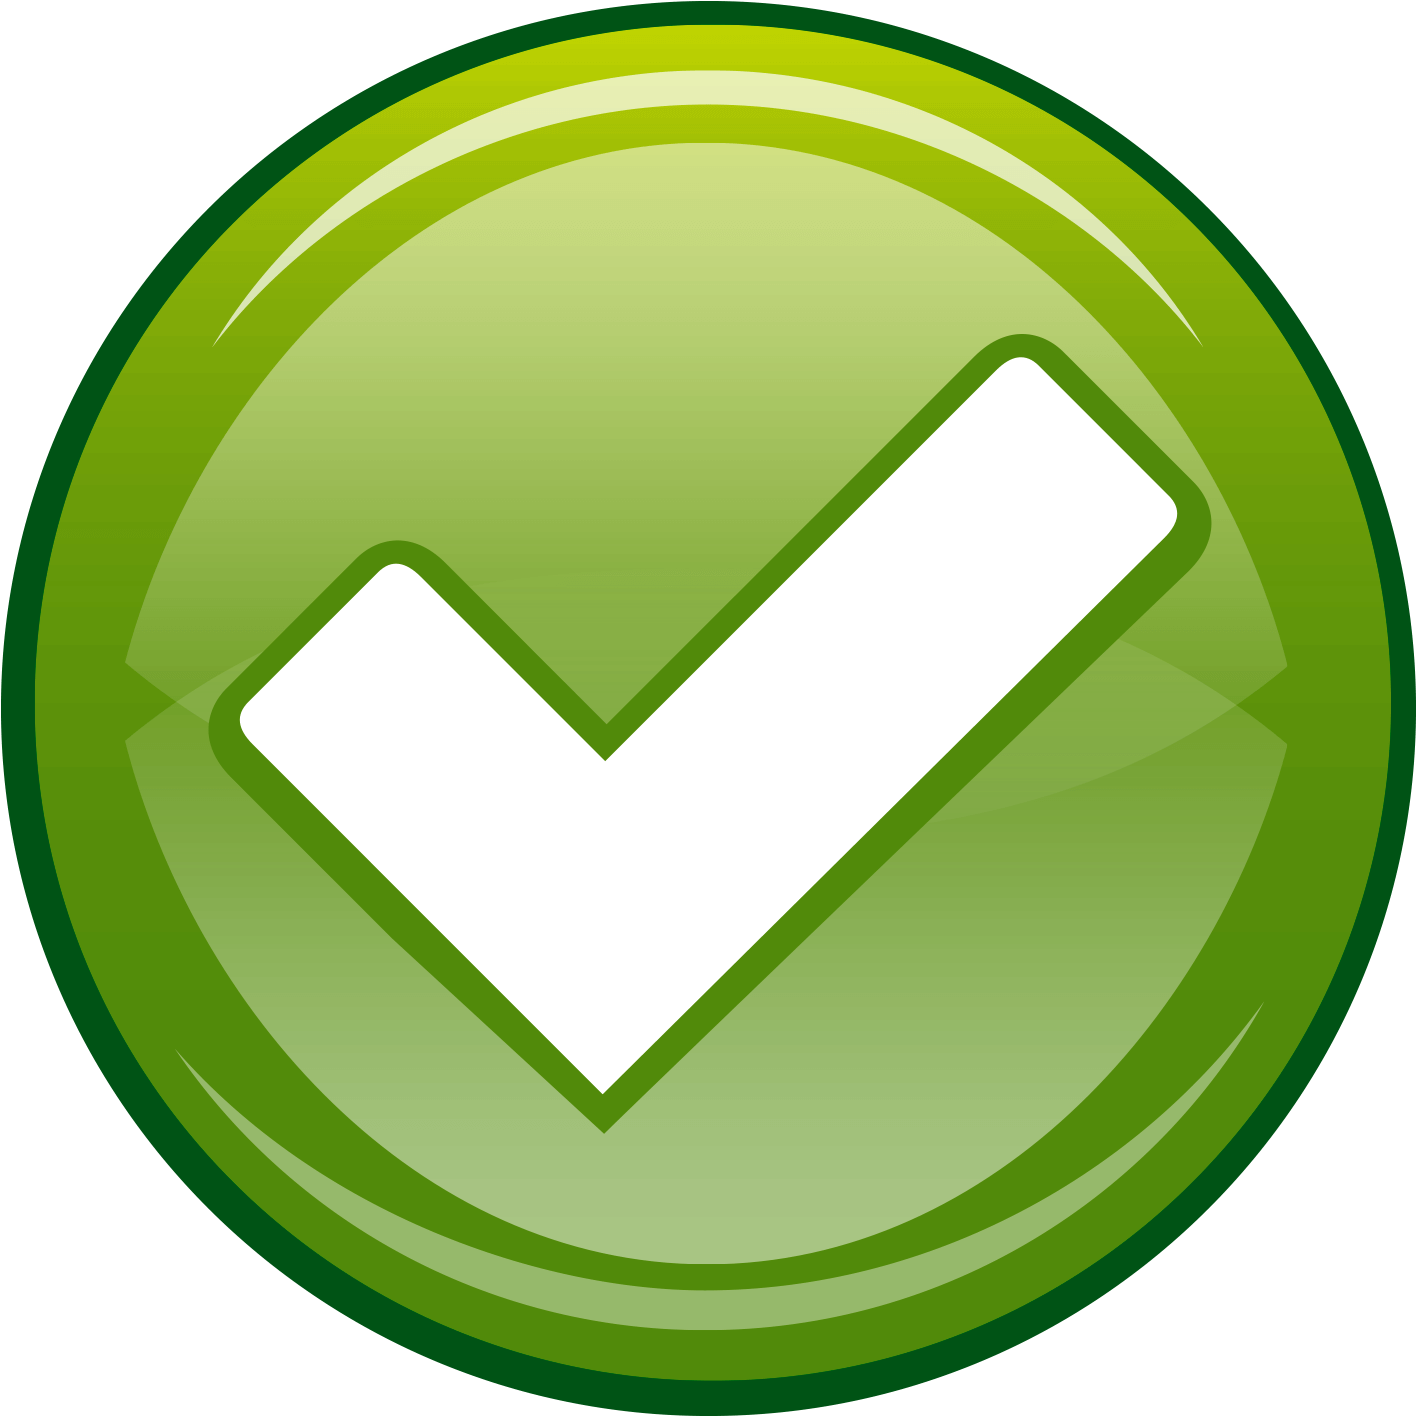 A Green Button With A White Tick